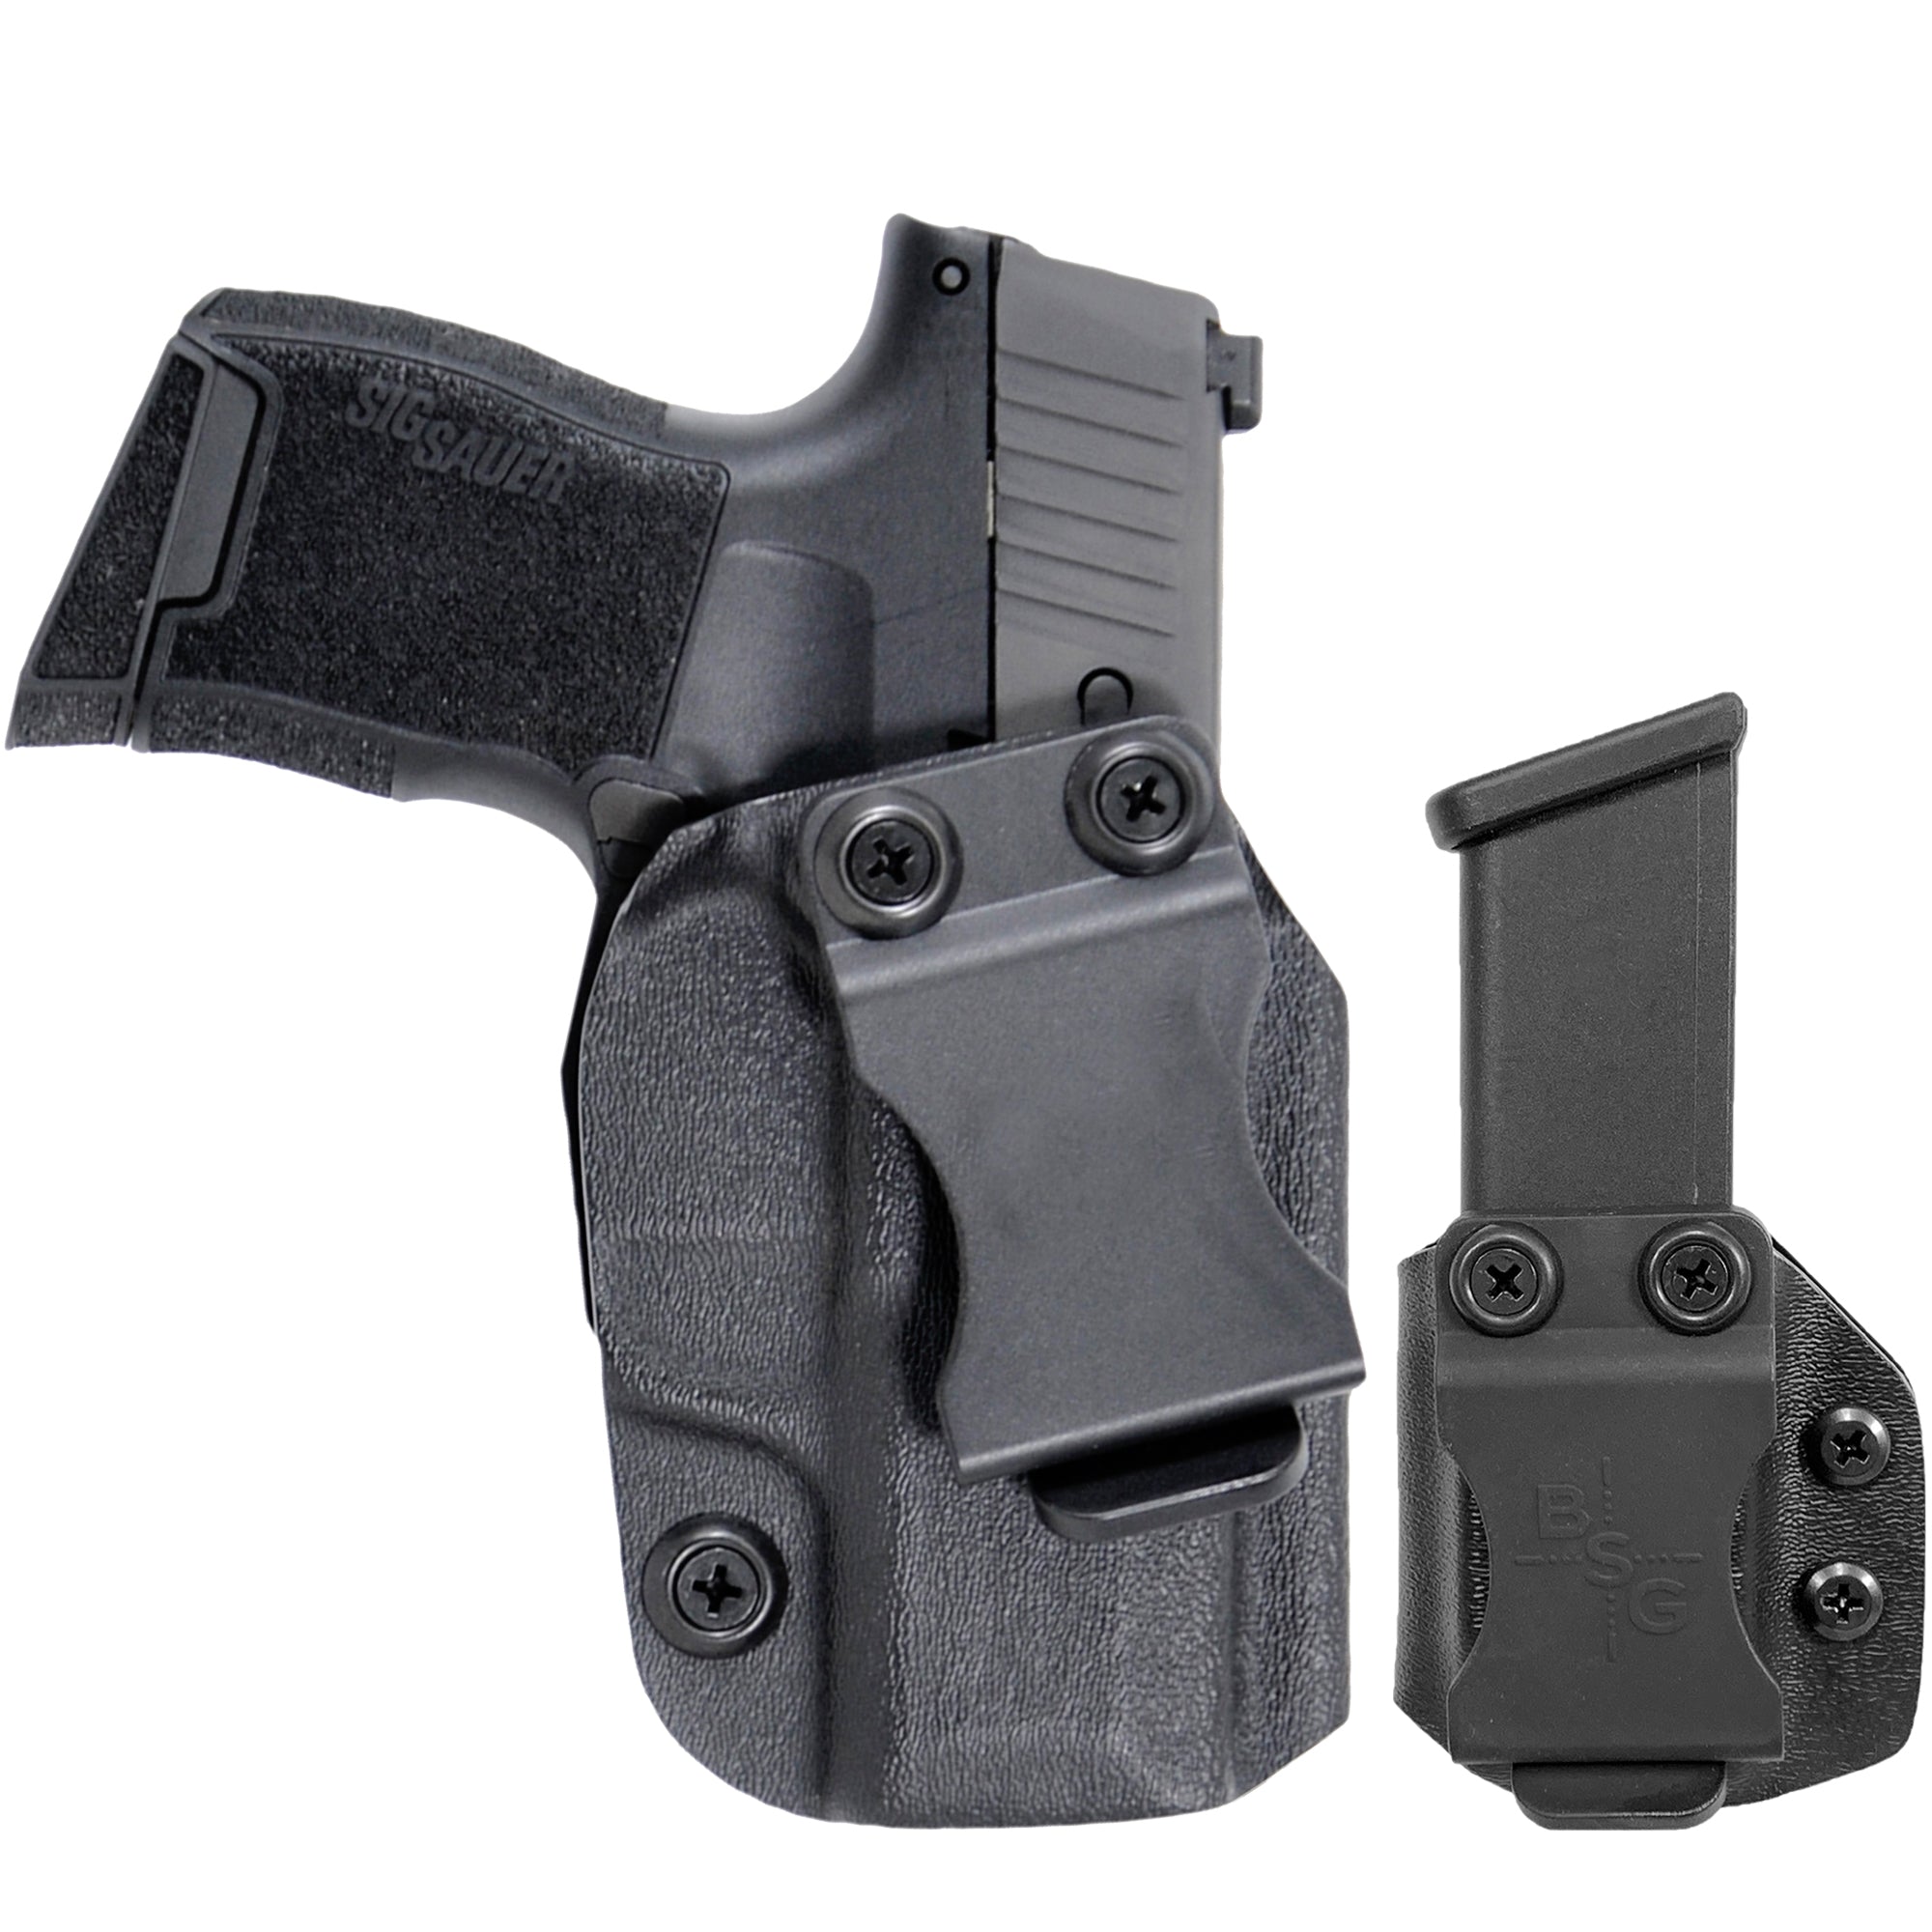 Sig Sauer P365 XL IWB Kydex Holster & Mag Pouch Combo